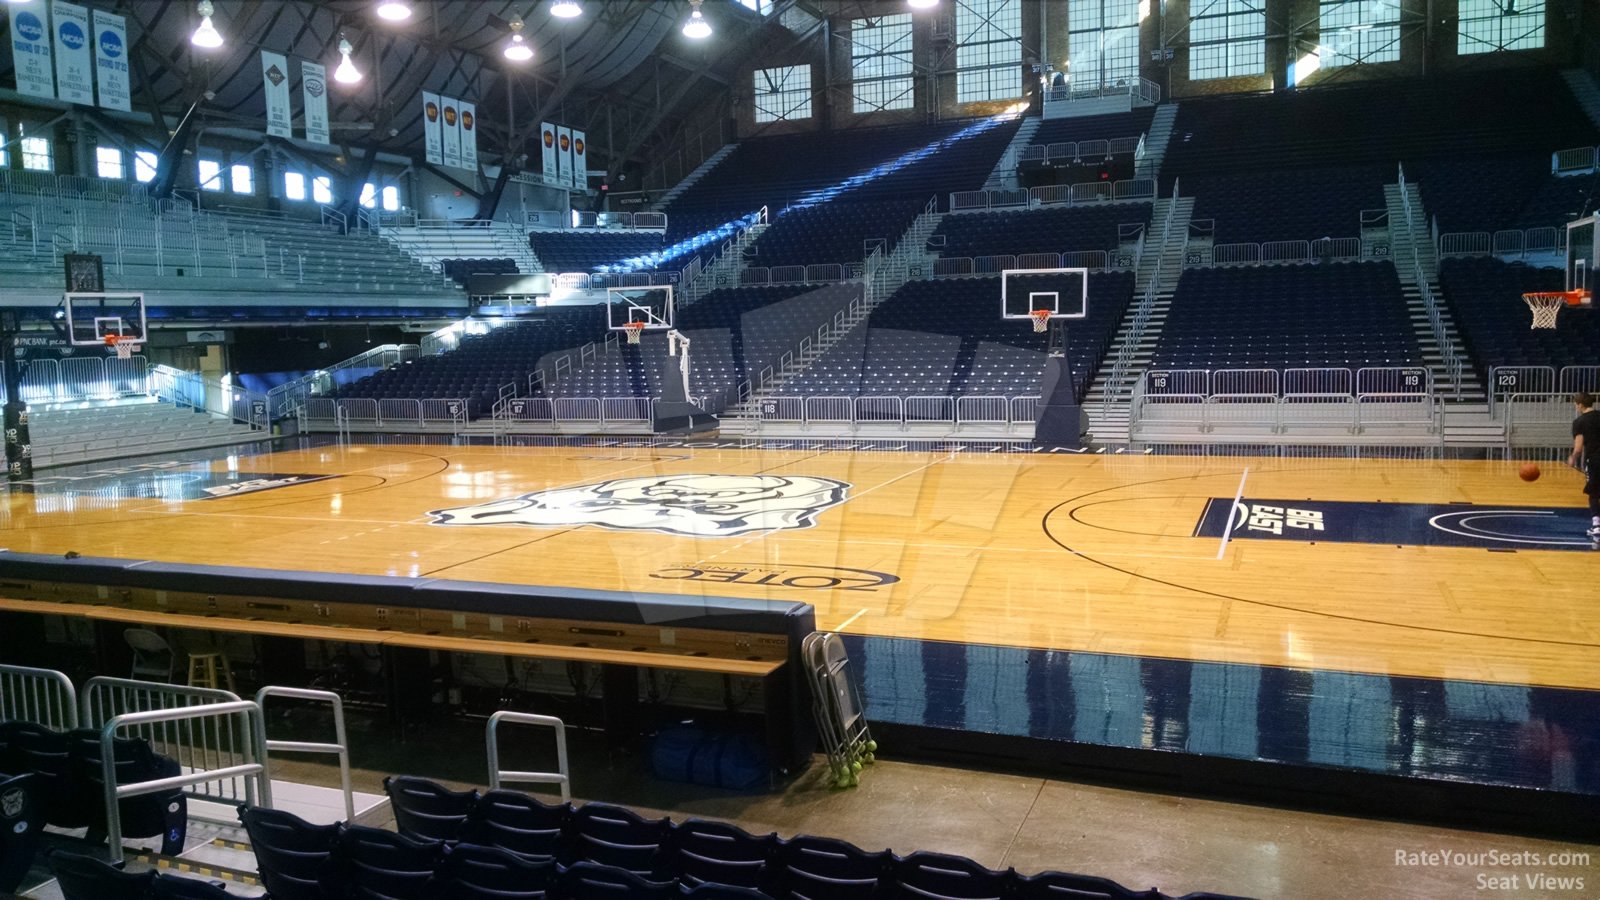 section 105, row 7 seat view  - hinkle fieldhouse